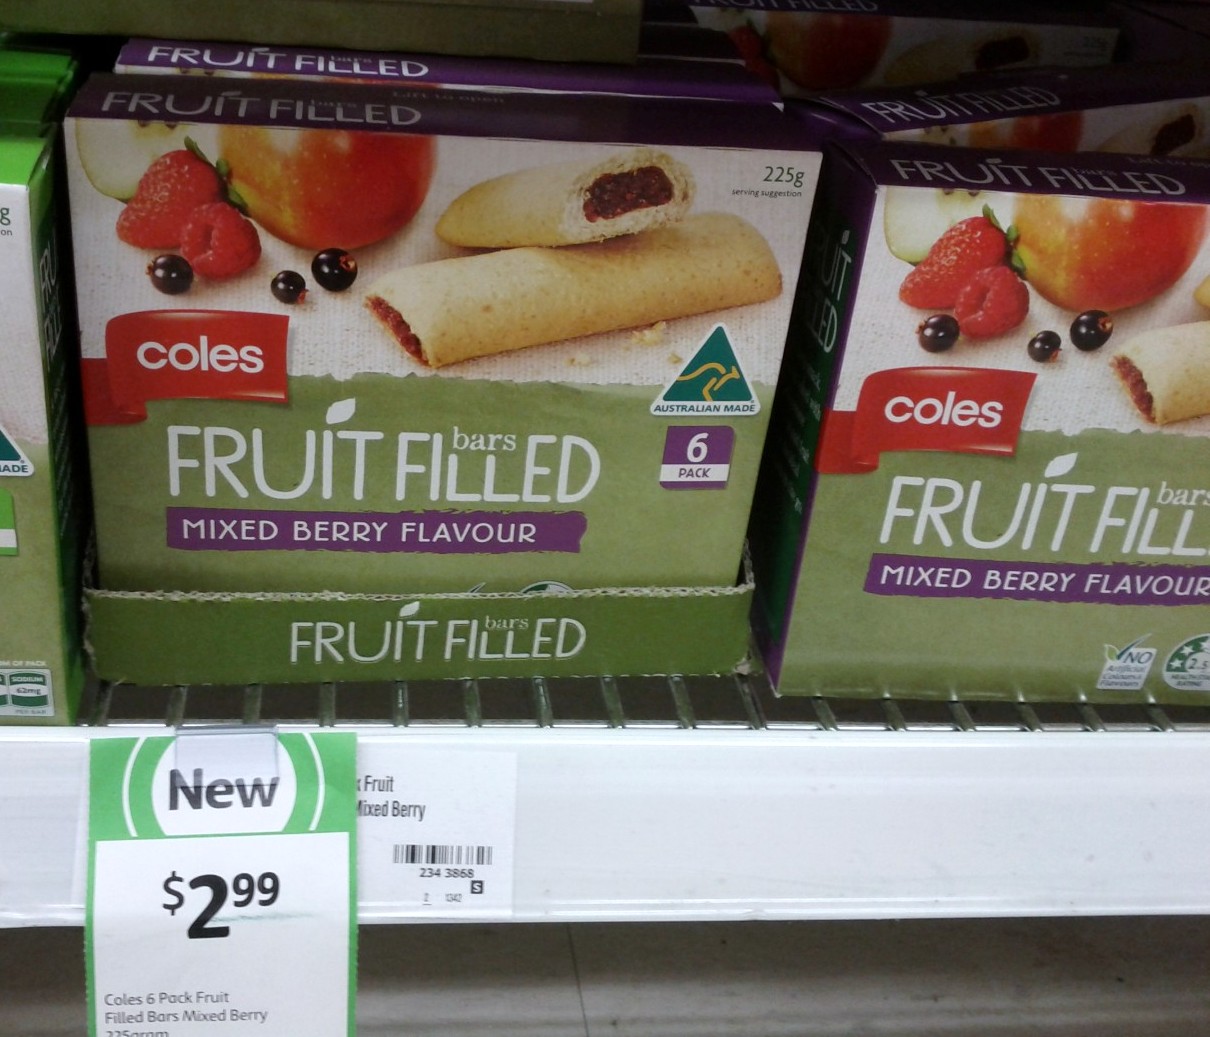 Coles Fruit Filled Bars 225g Mixed Berry Flavour